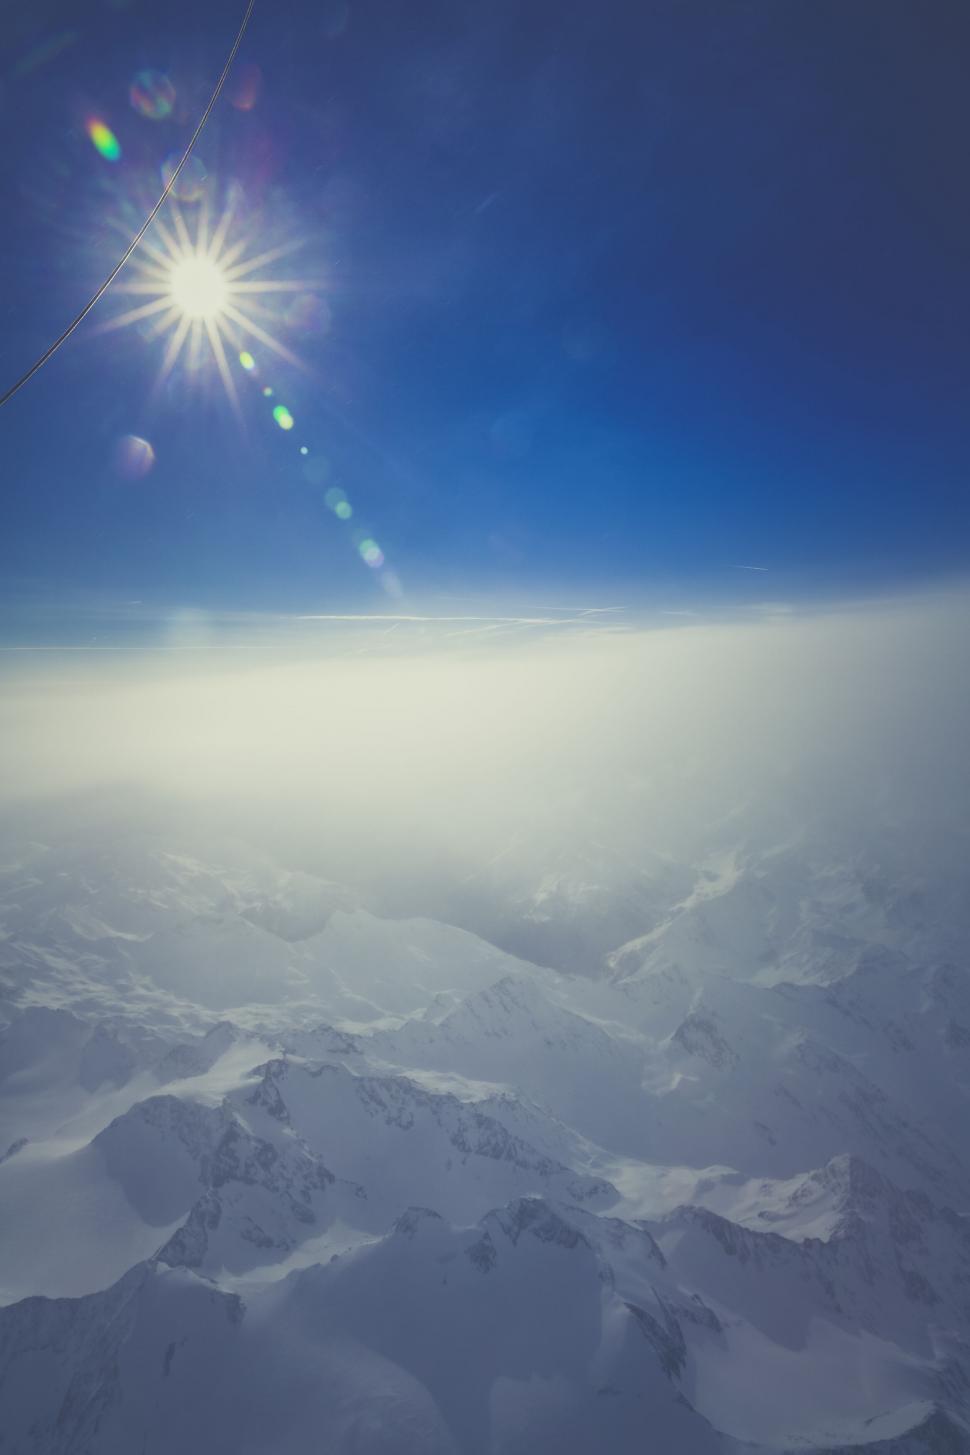 Free Image of Radiant sun flare over snowy mountain peaks 